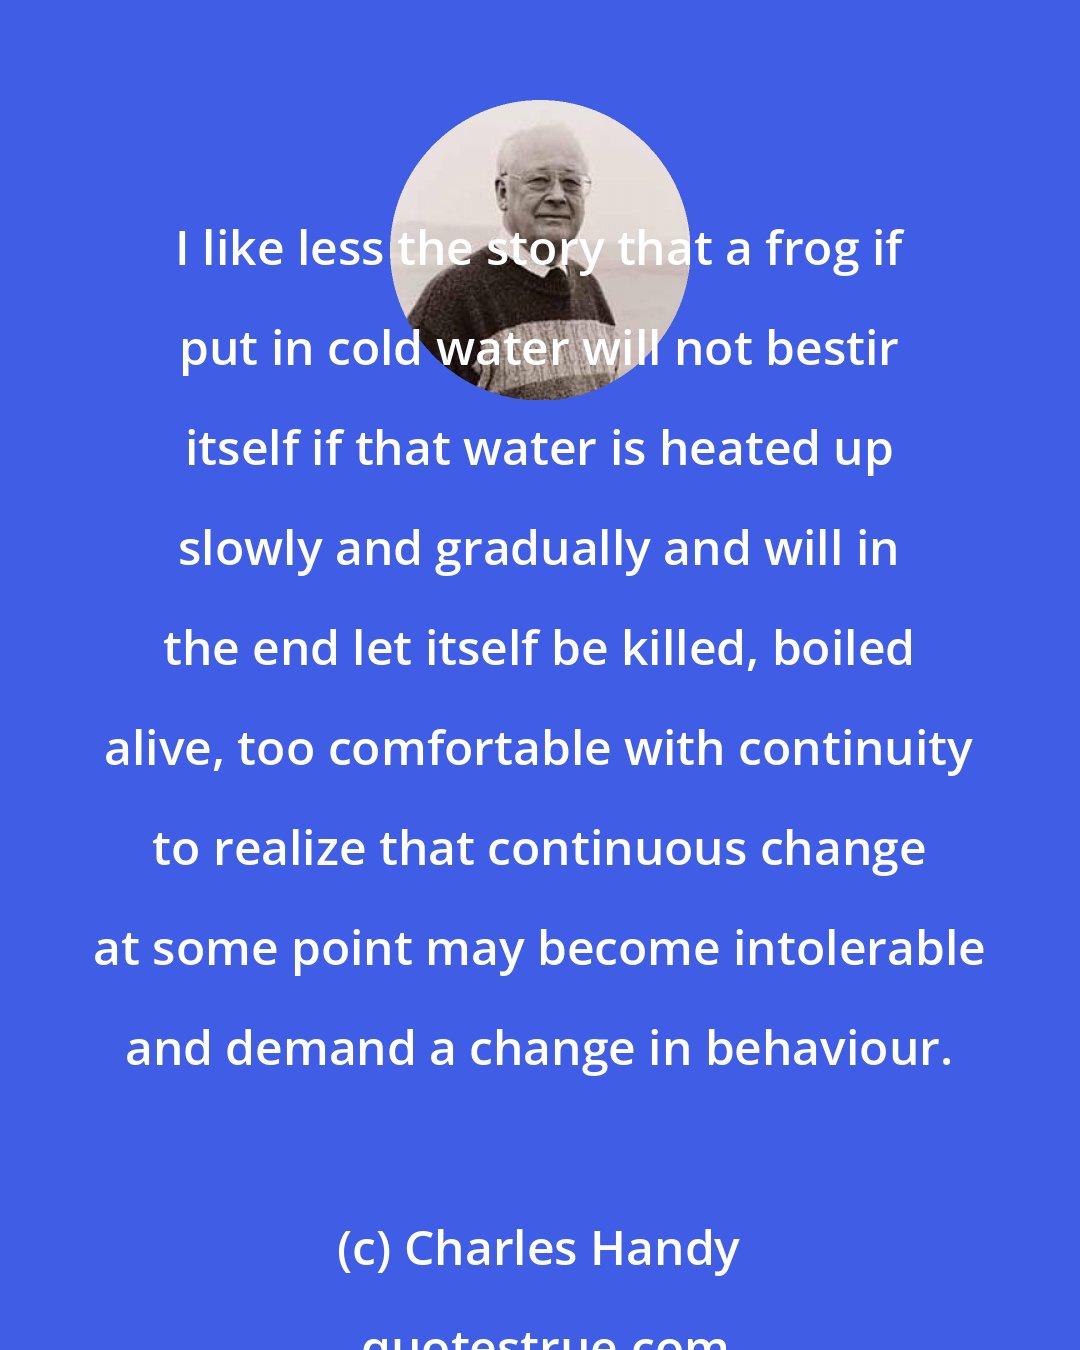 Charles Handy: I like less the story that a frog if put in cold water will not bestir itself if that water is heated up slowly and gradually and will in the end let itself be killed, boiled alive, too comfortable with continuity to realize that continuous change at some point may become intolerable and demand a change in behaviour.